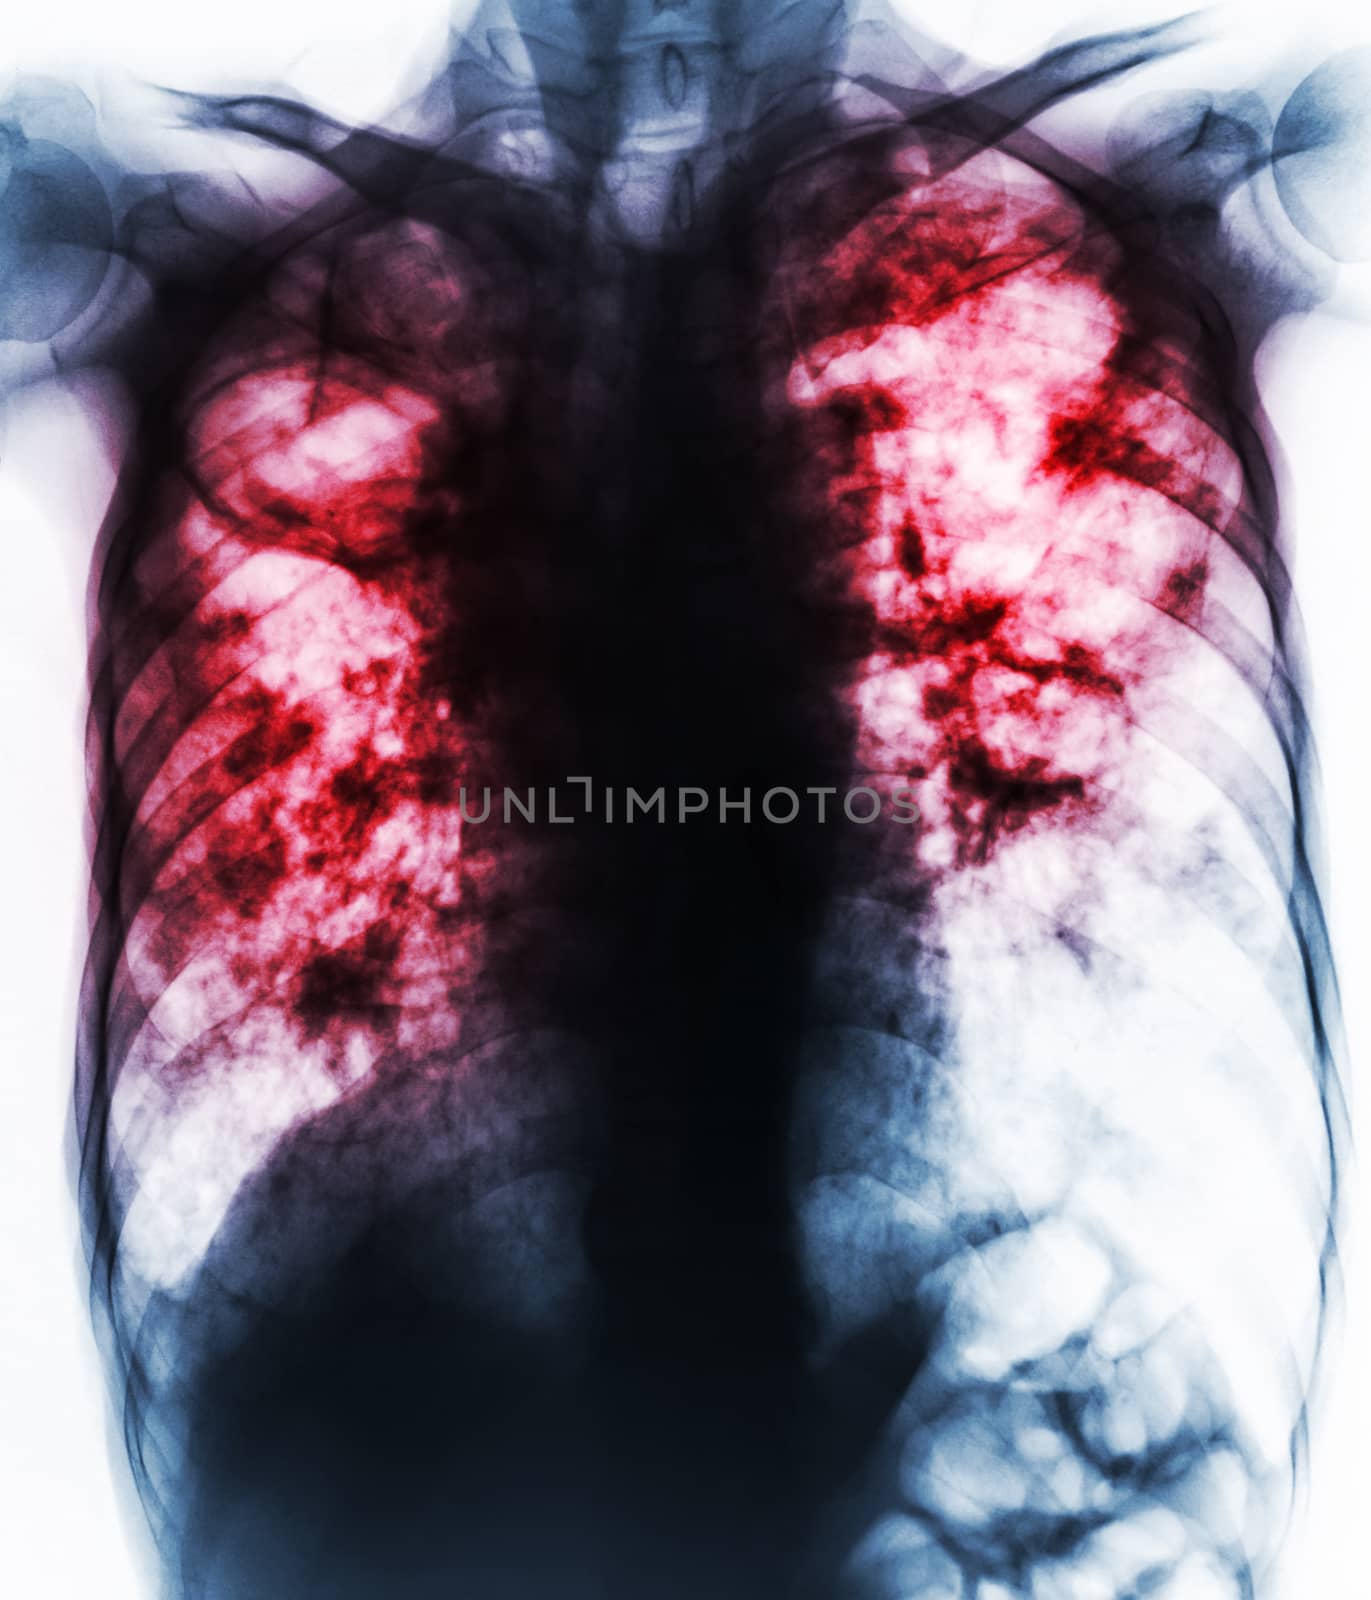 Pulmonary Tuberculosis . Film chest x-ray show fibrosis,cavity,interstitial infiltration both lung due to Mycobacterium tuberculosis infection . by stockdevil